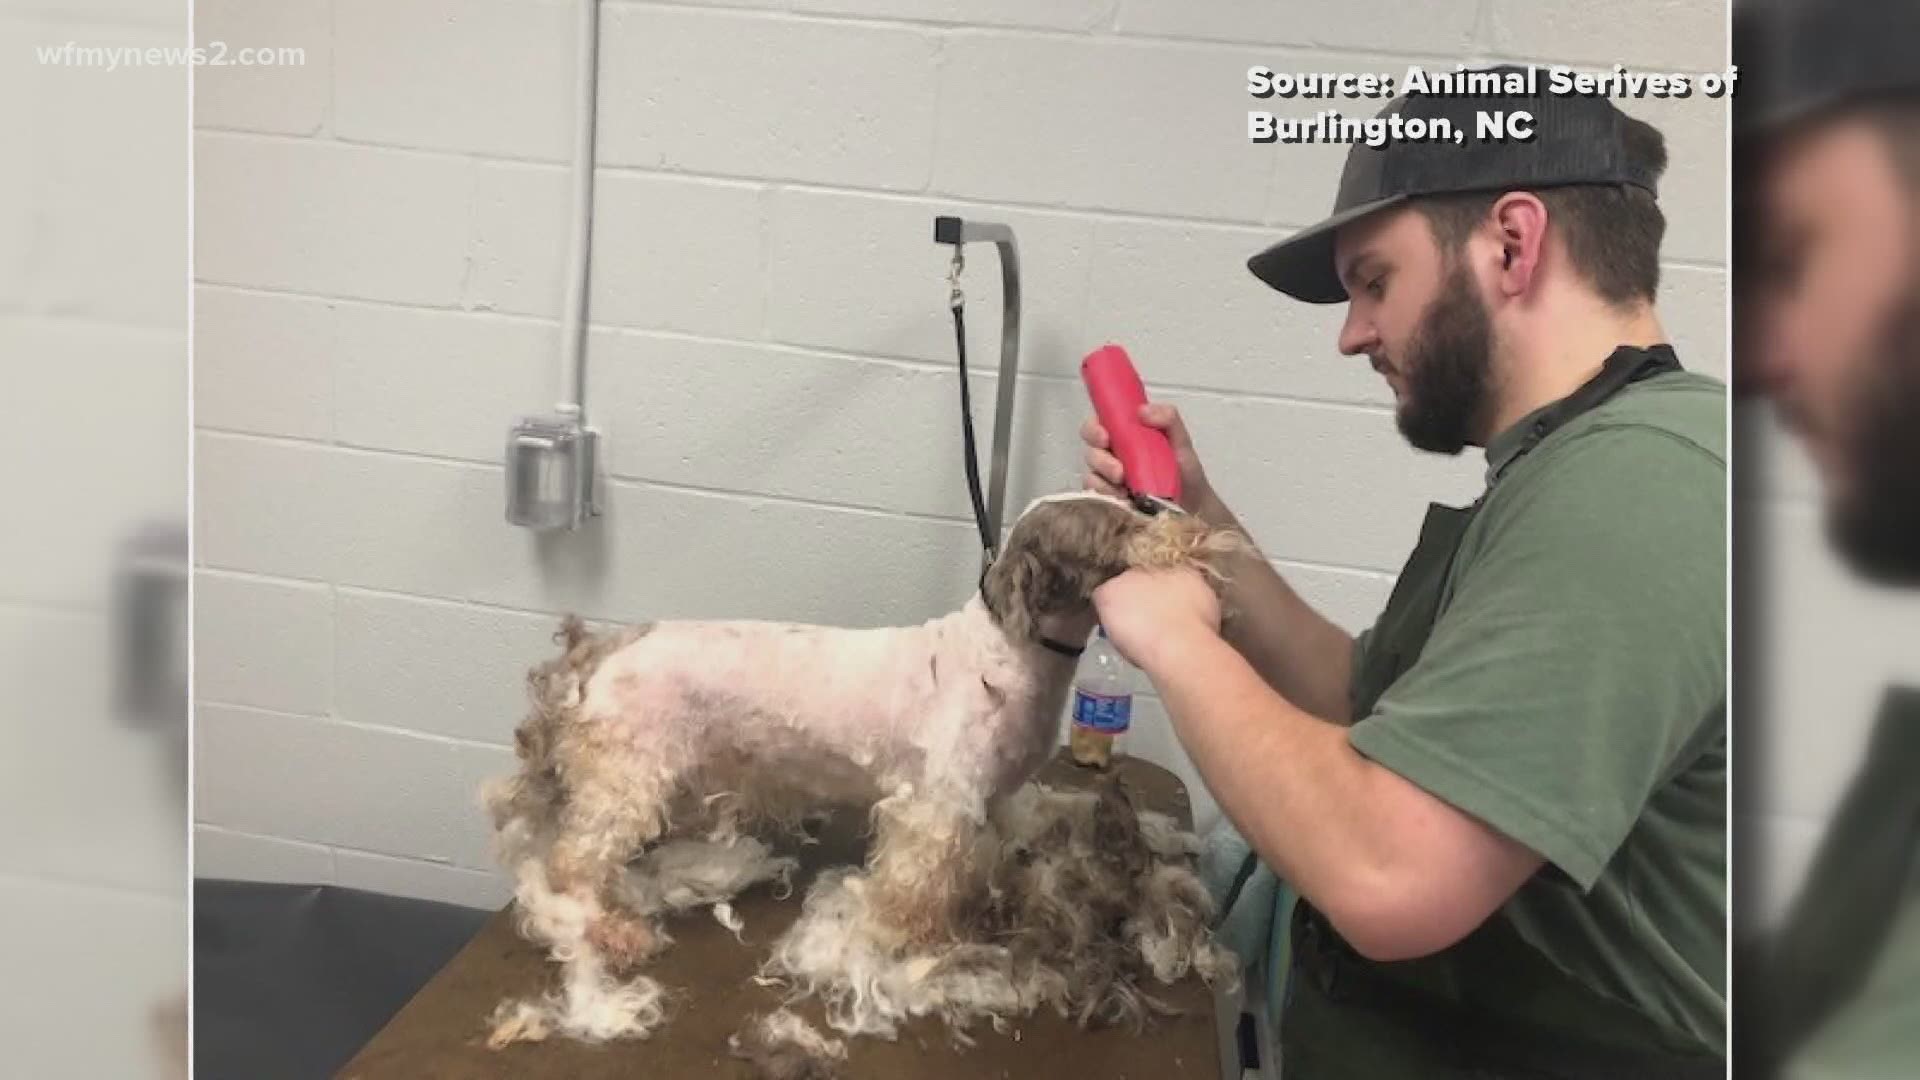 Burlington Animal Services says it's rare to encounter a situation where nine dogs of any breed are dropped off by the roadside.